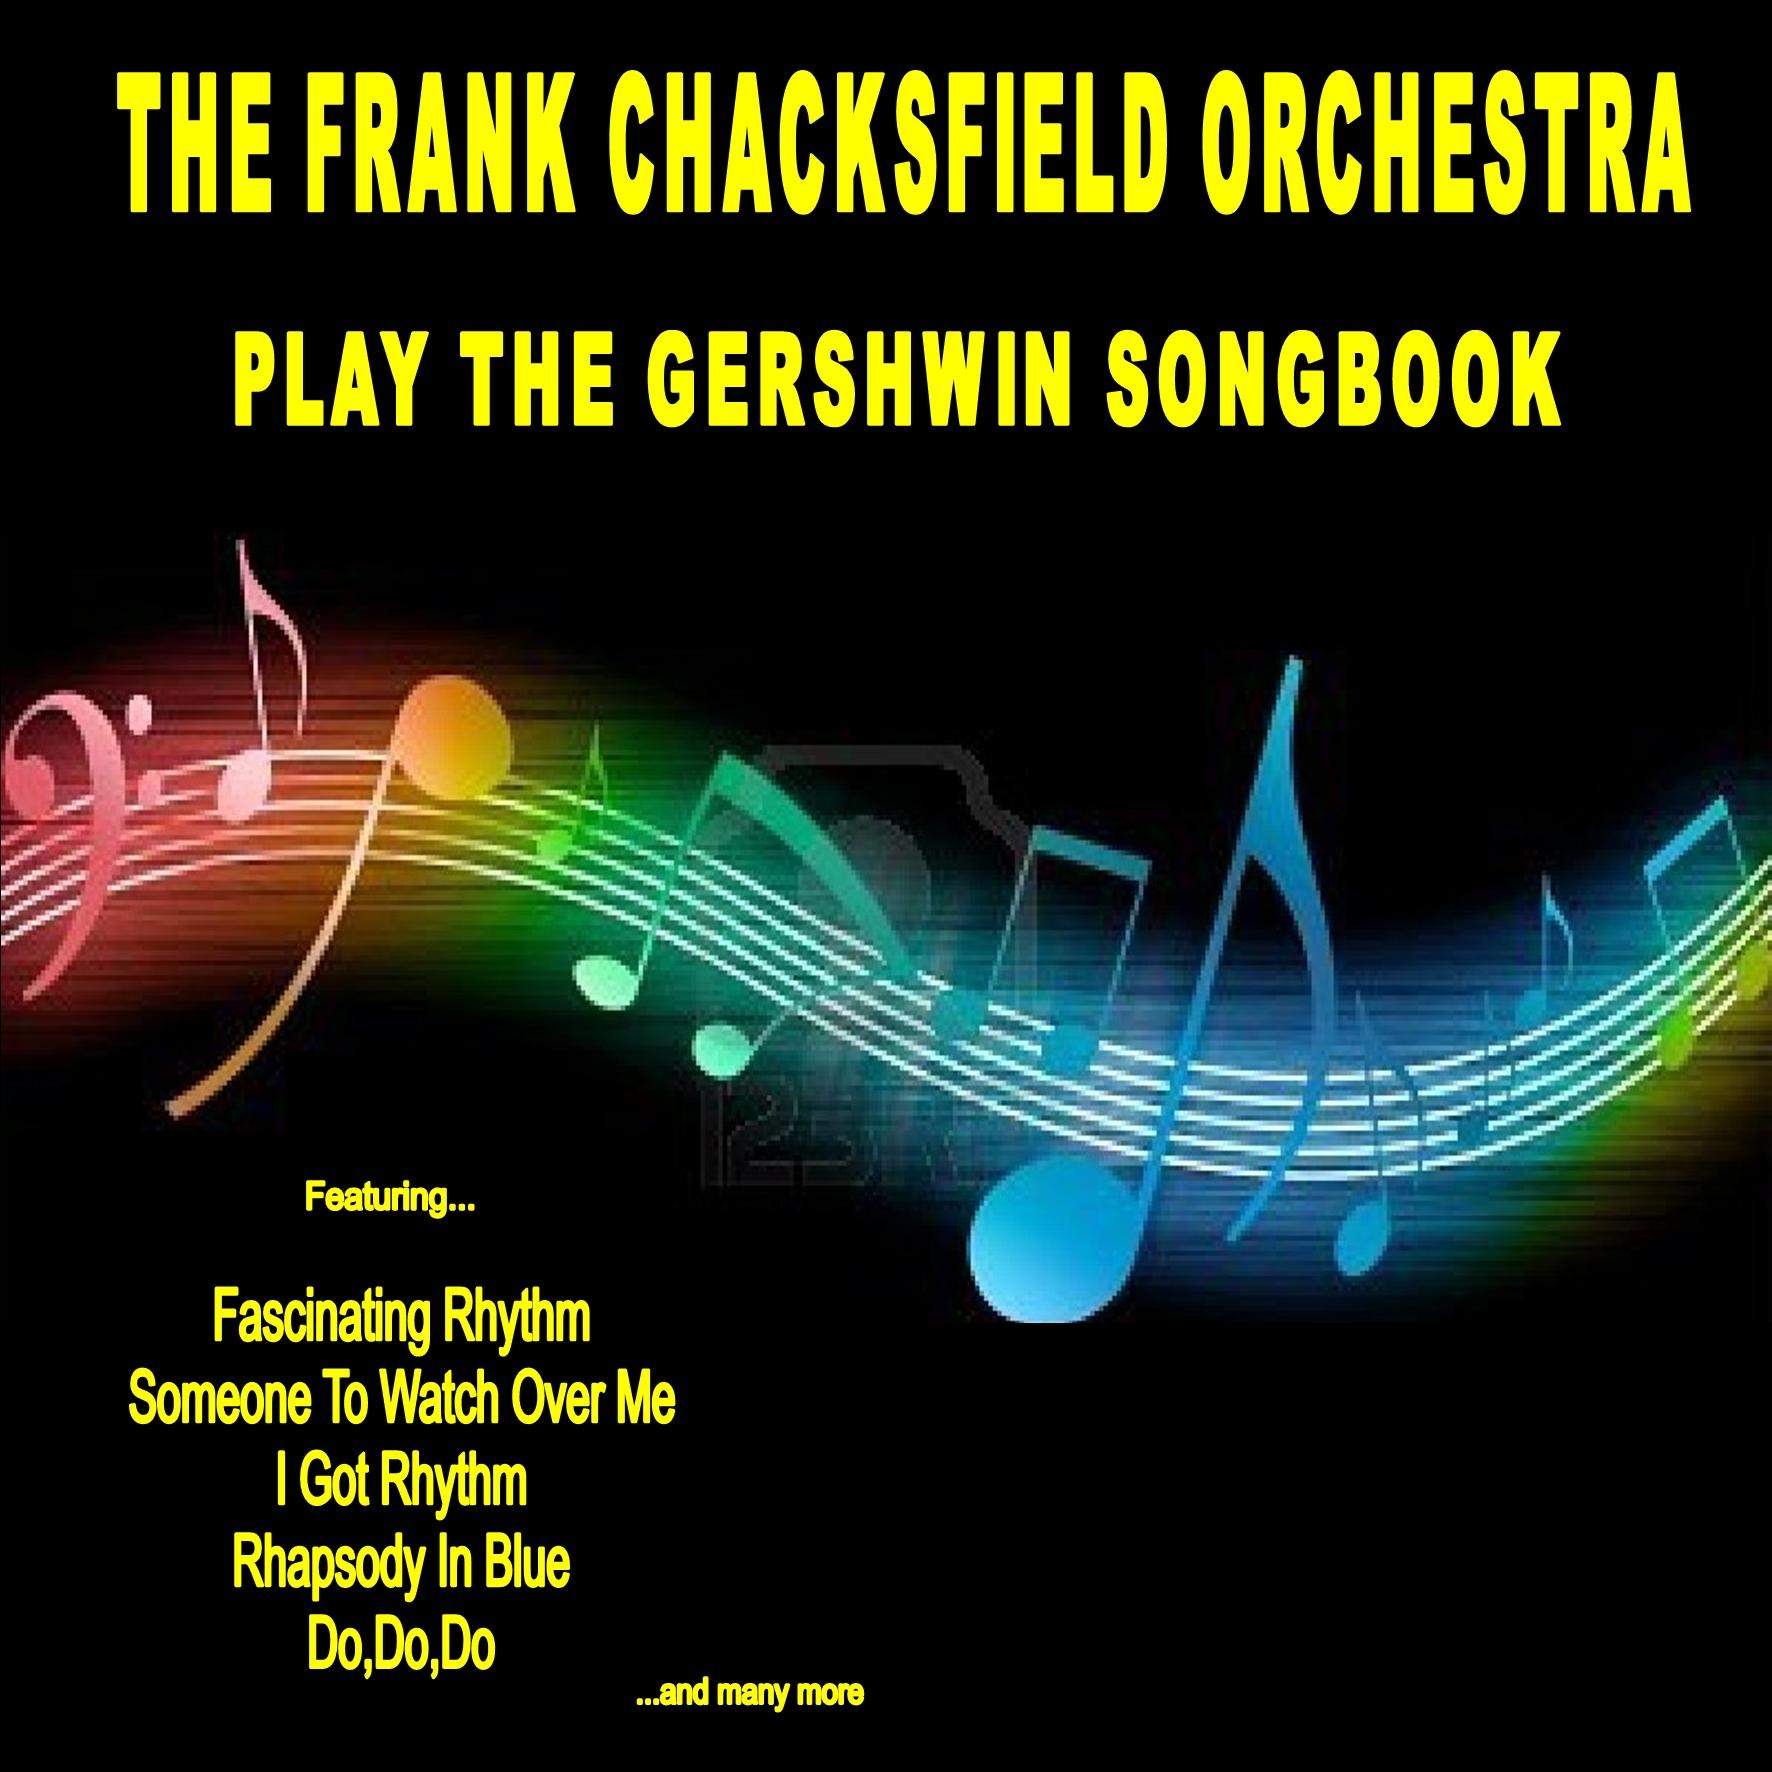 The Frank Chacksfield Orchestra Plays the Gershwin Songbook